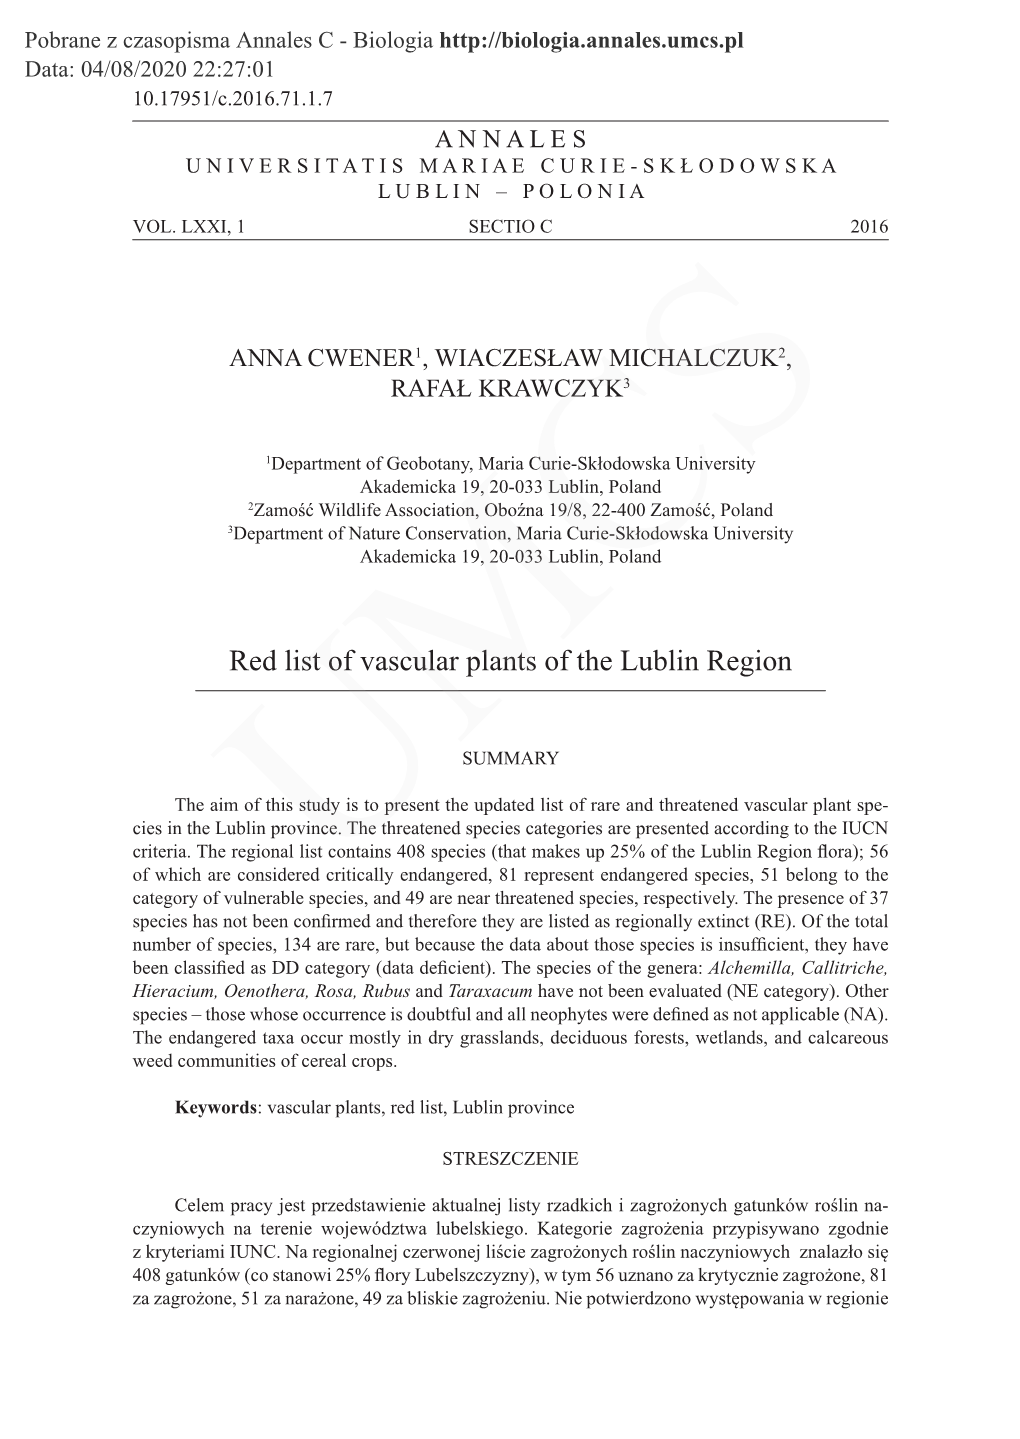 Red List of Vascular Plants of the Lublin Region